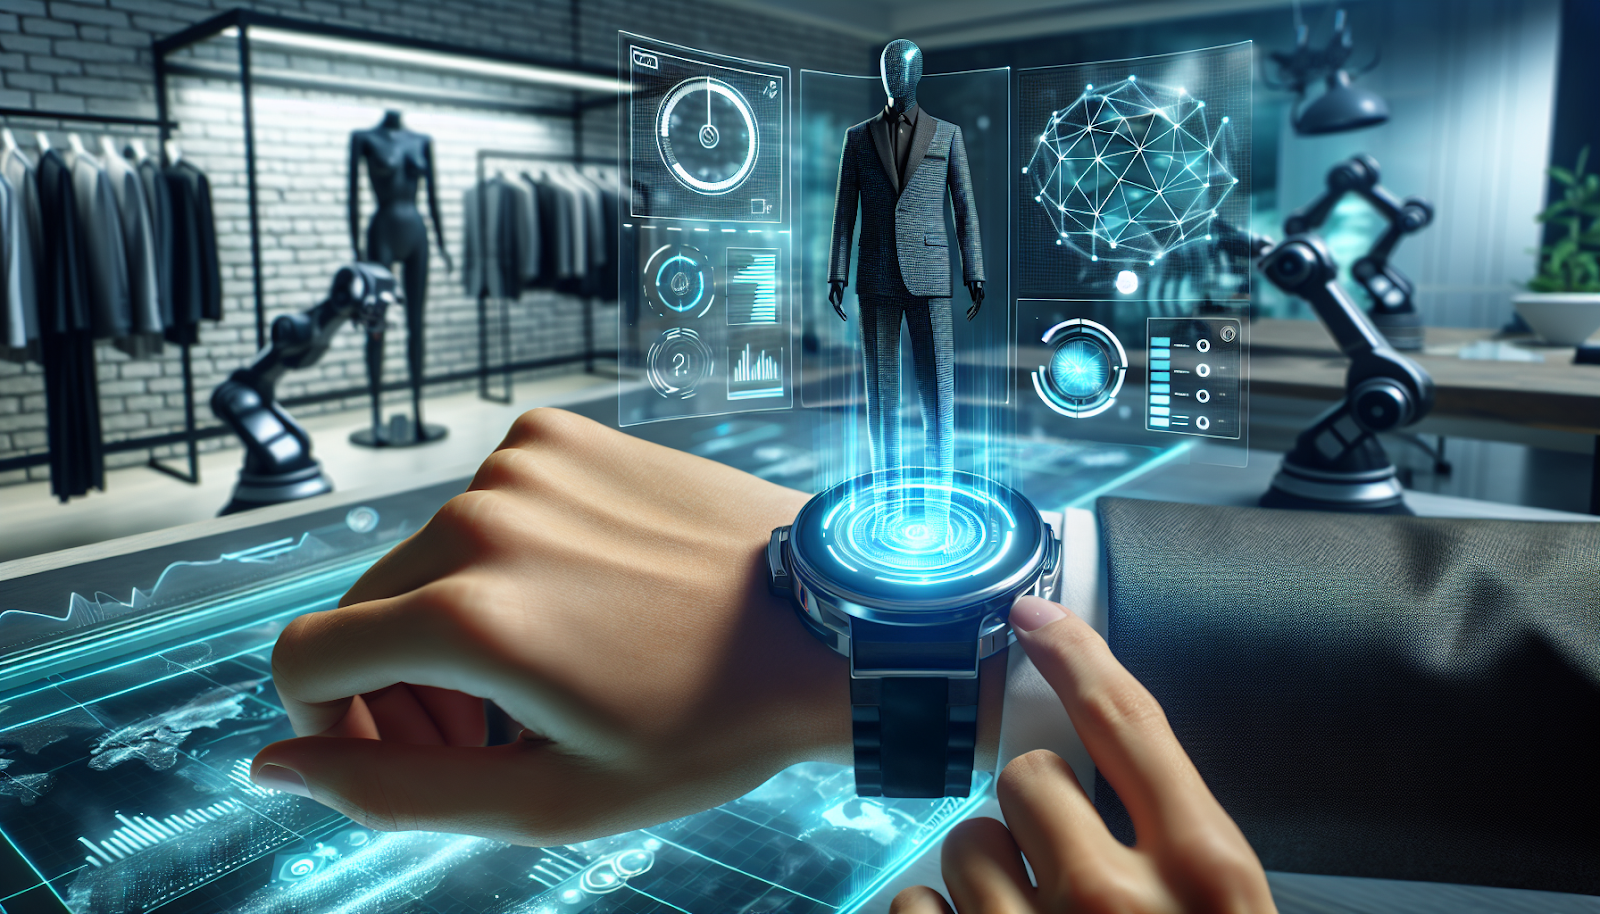 A futuristic AI technology integrated with fashion ERP software in apparel management